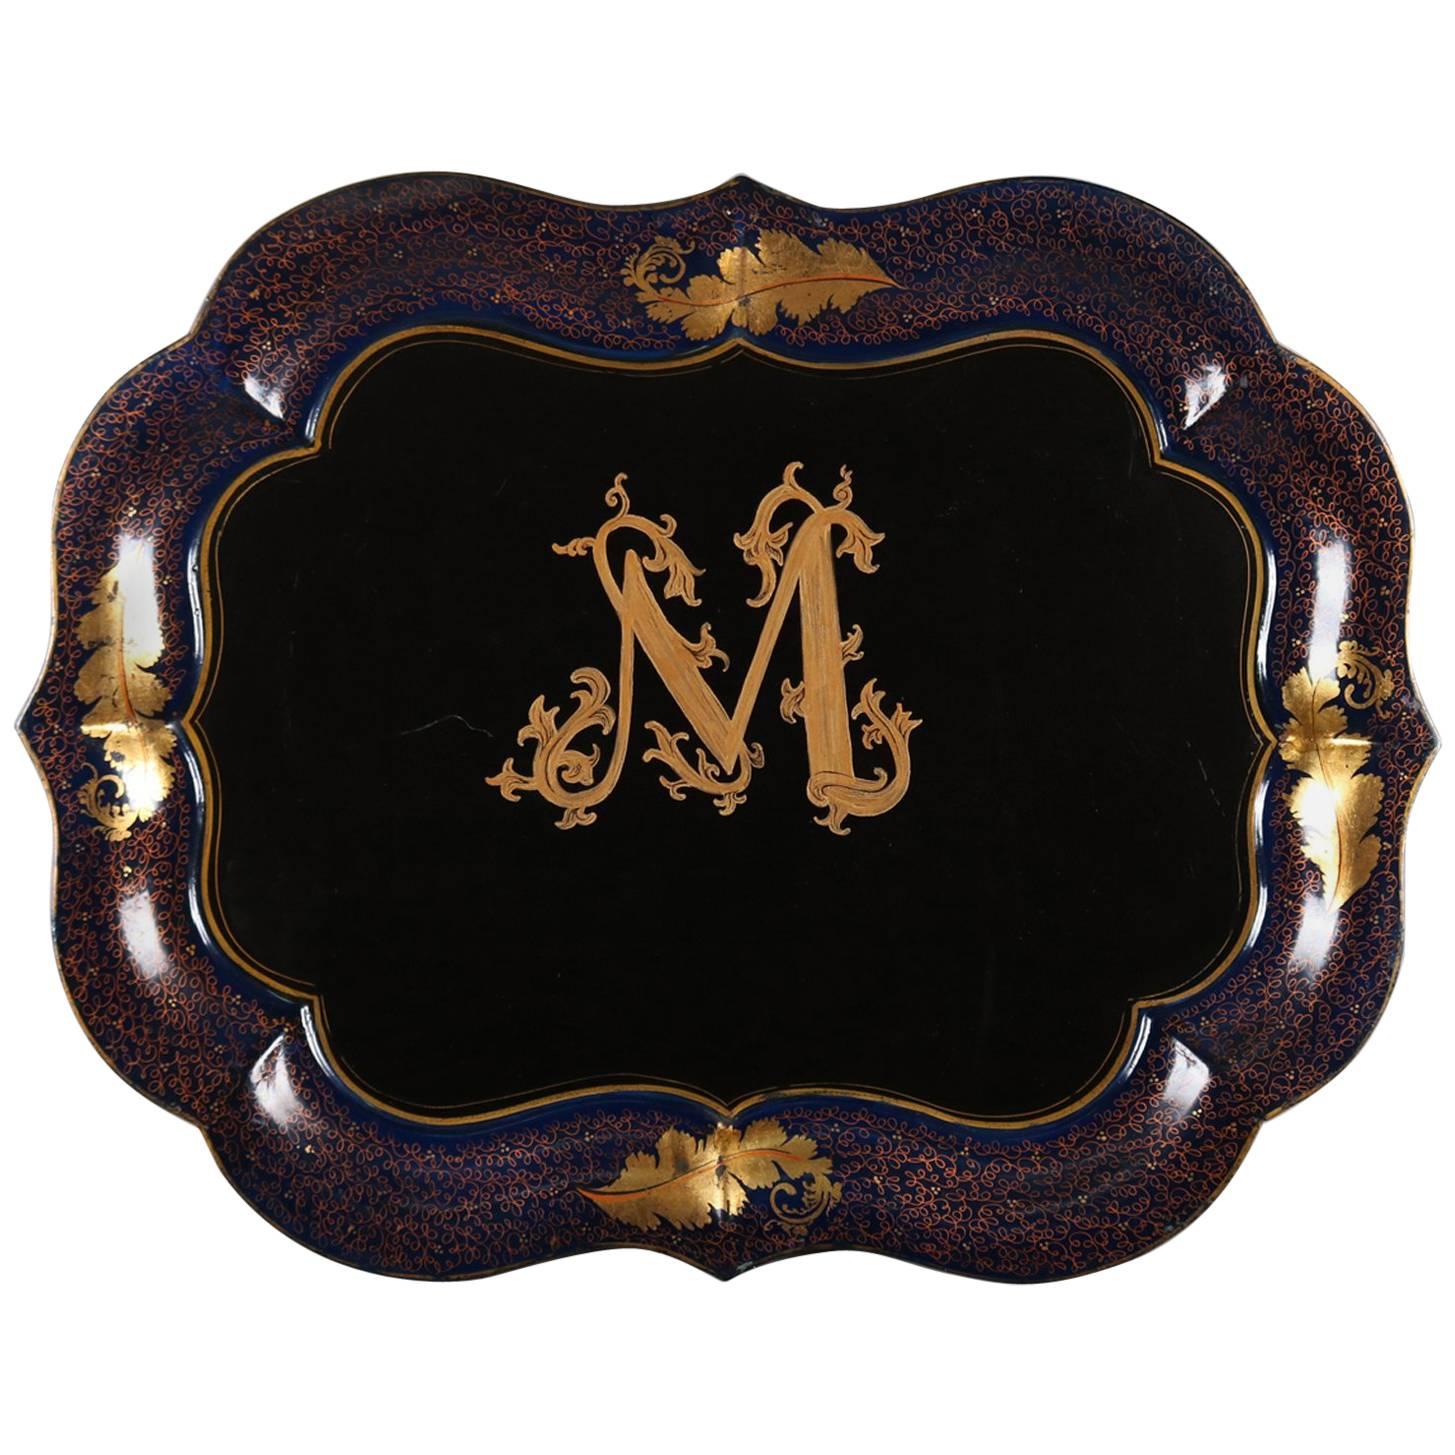 Antique Gilt Decorated Toleware Serving Tray, 19th Century